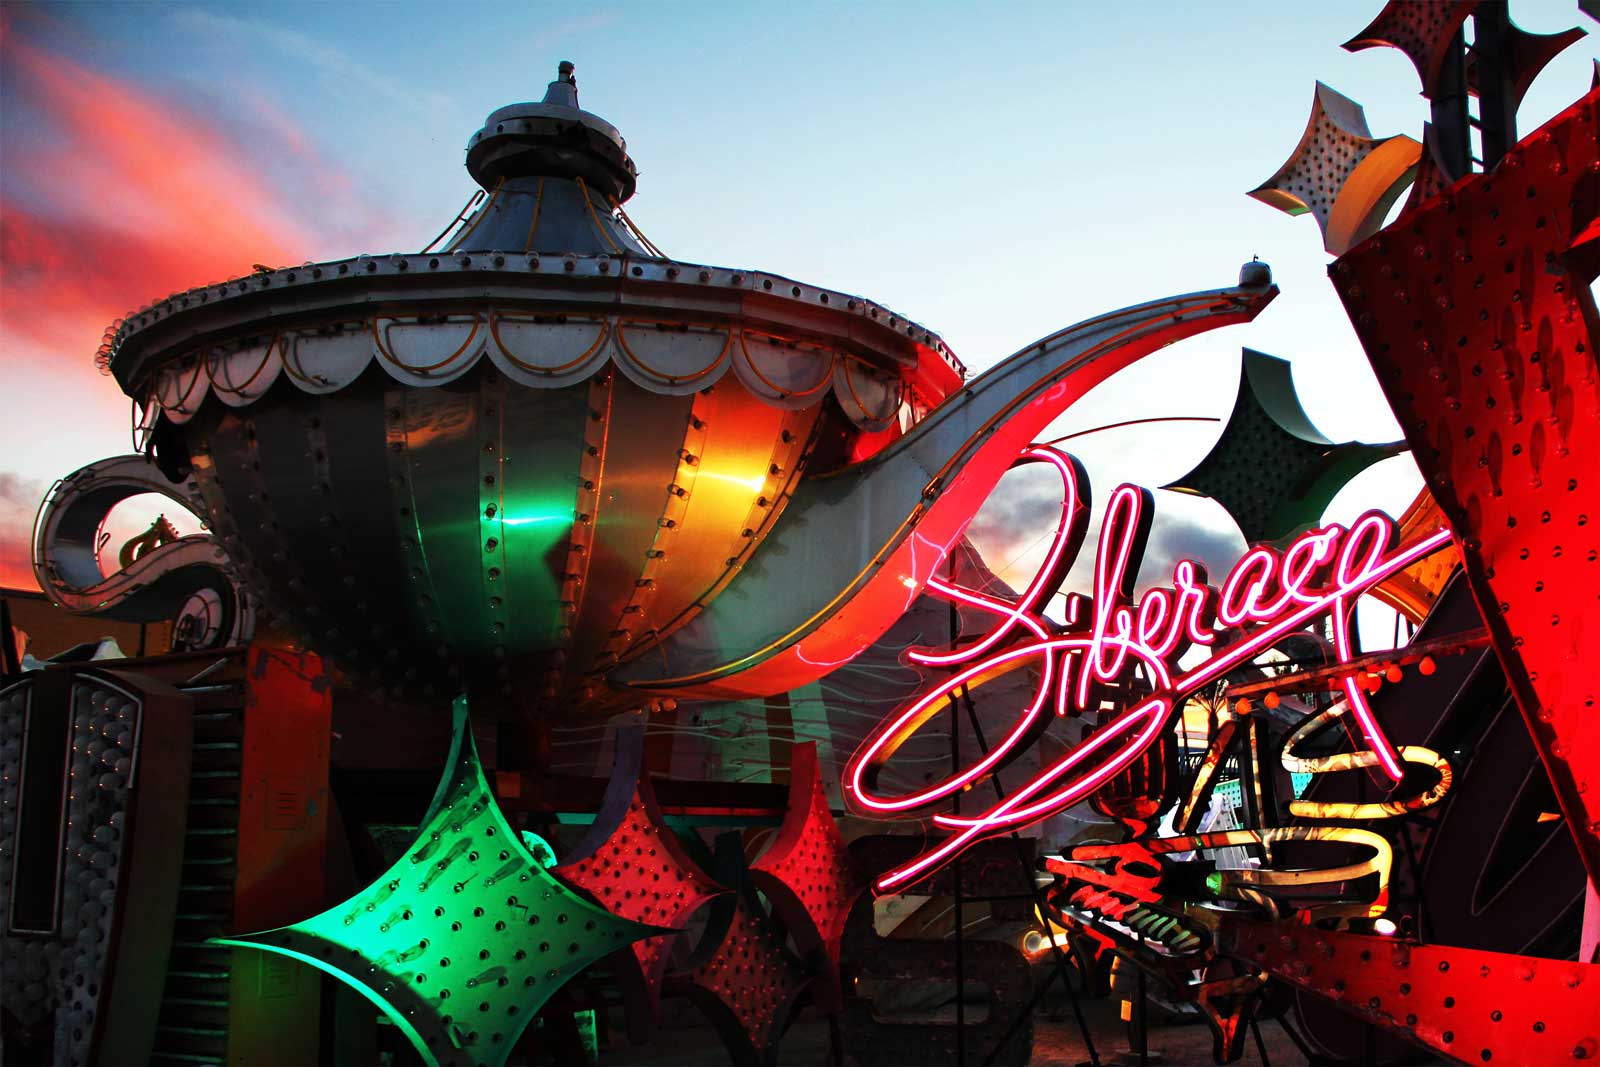 Liberace's neon sign is just one of the pieces of Vintage Vegas you'll see at The Neon Museum.